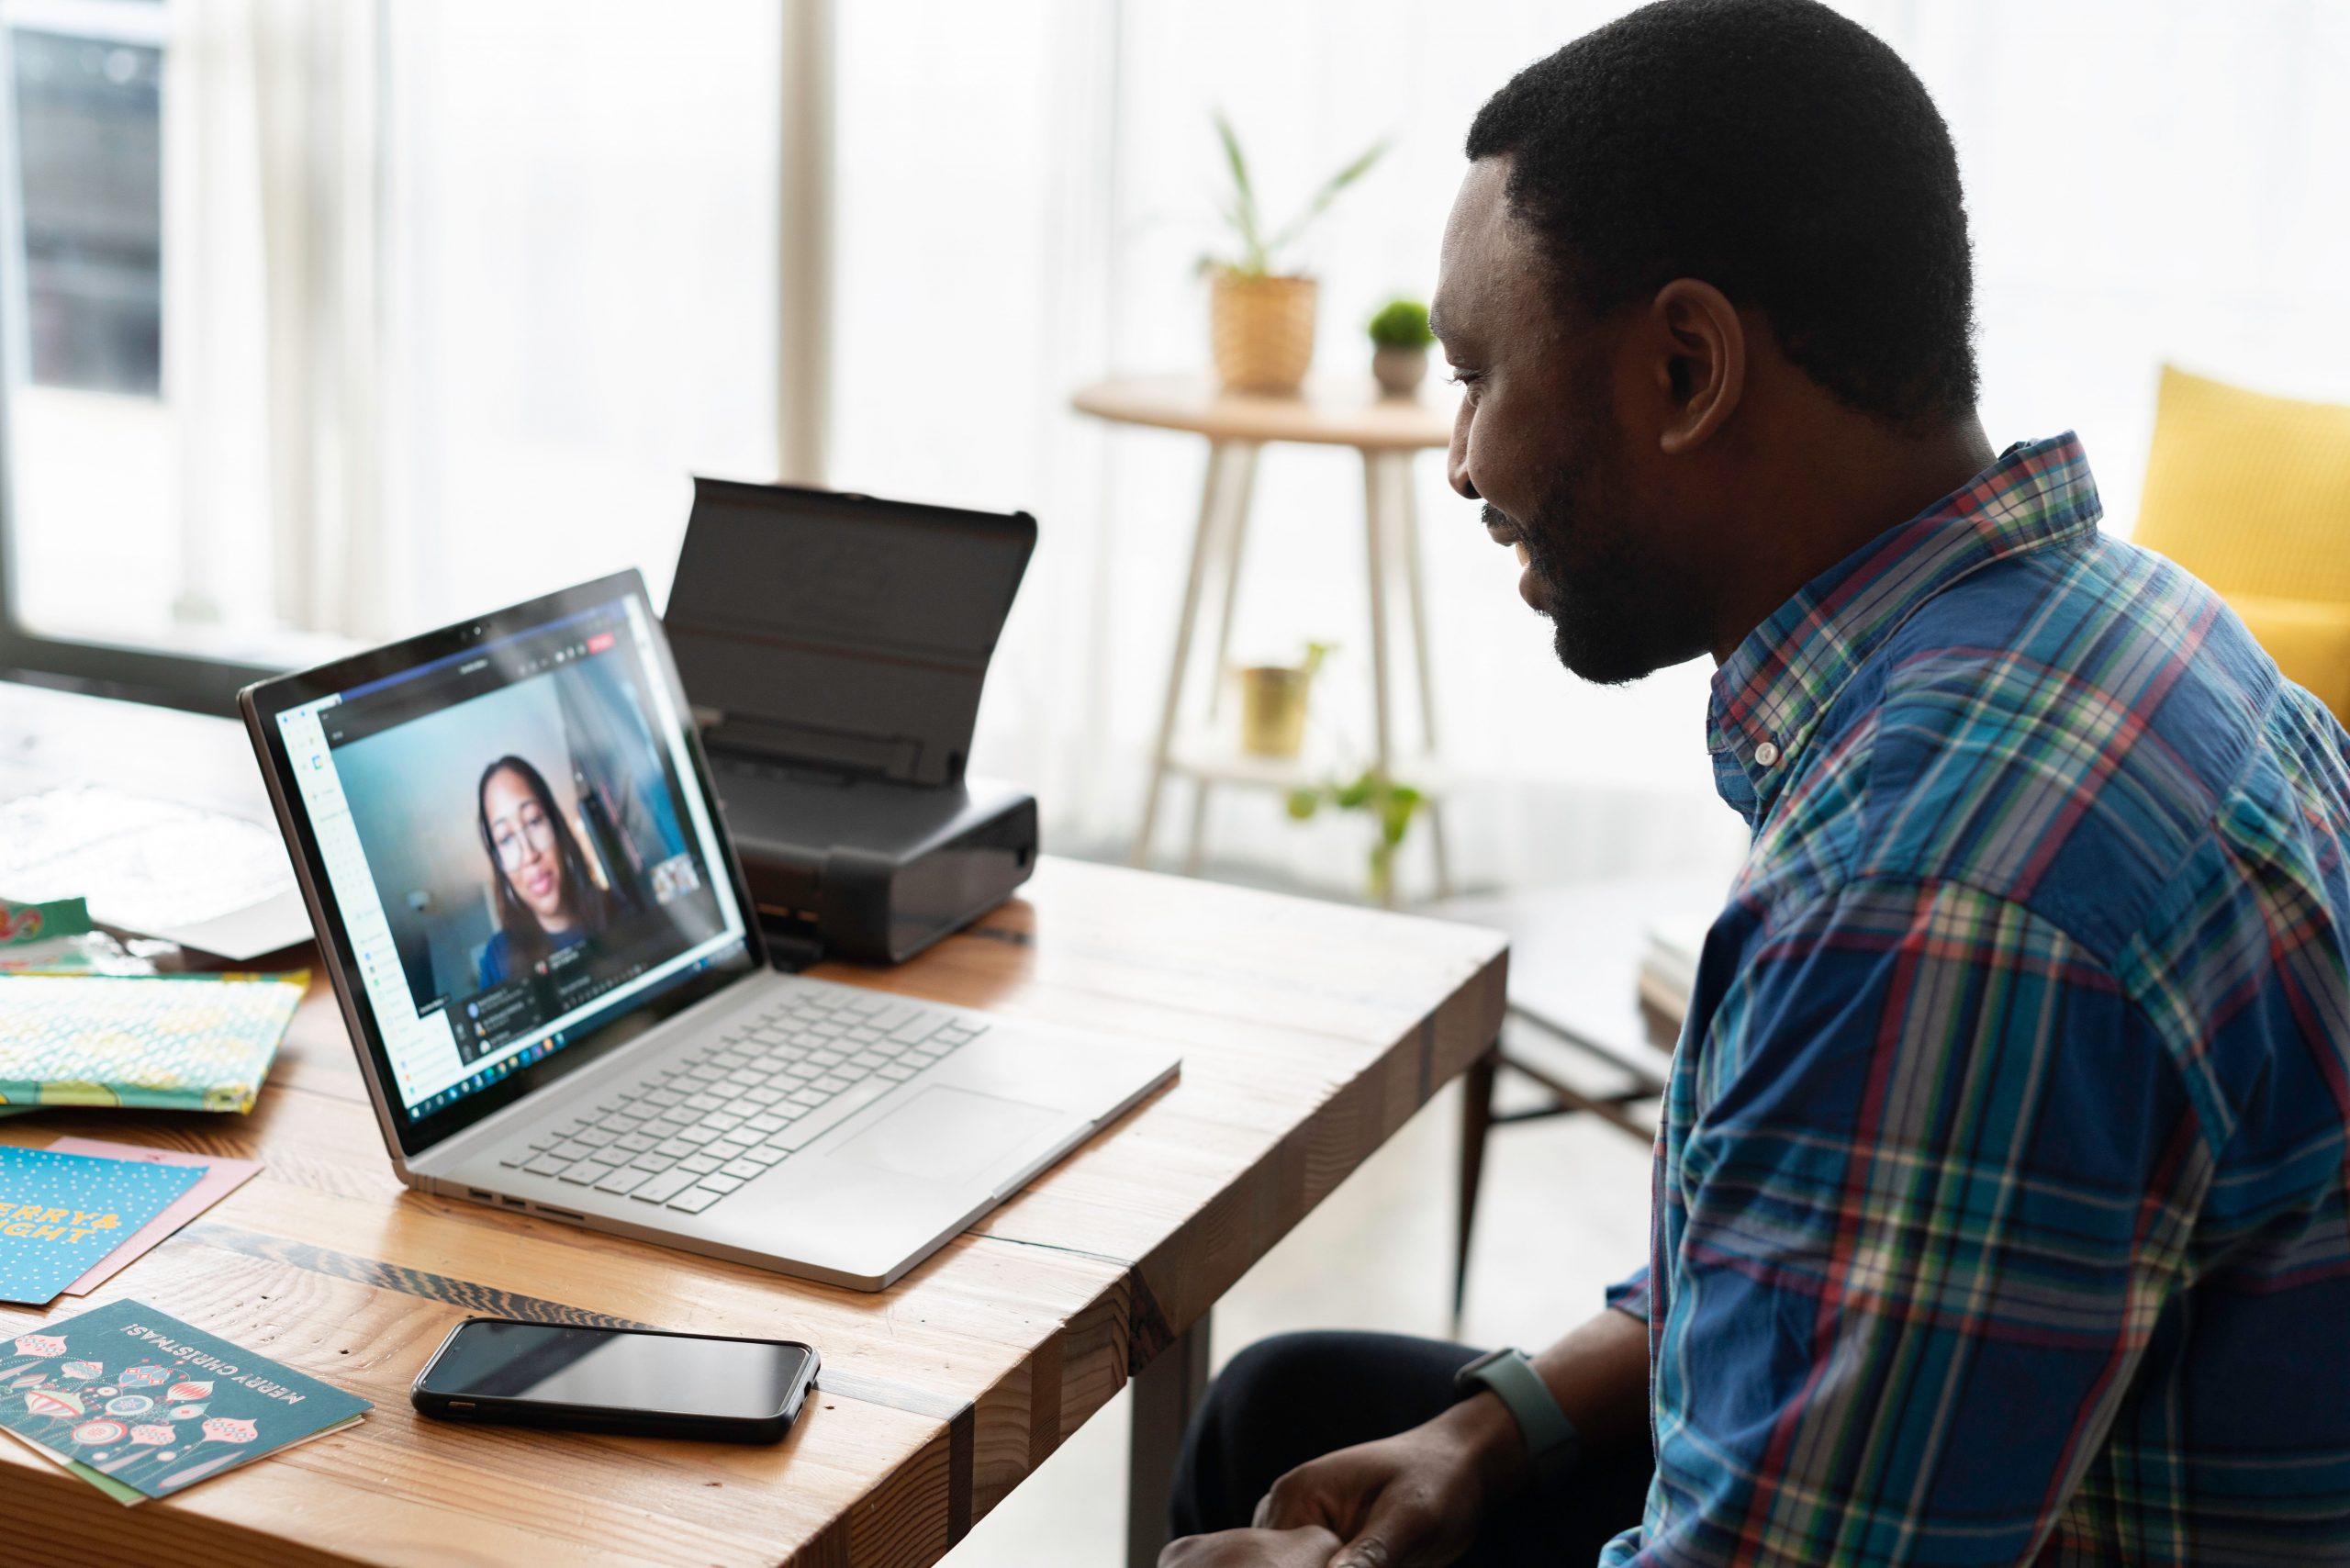 A man looking at a laptop, he appears to be in a video call with a woman.